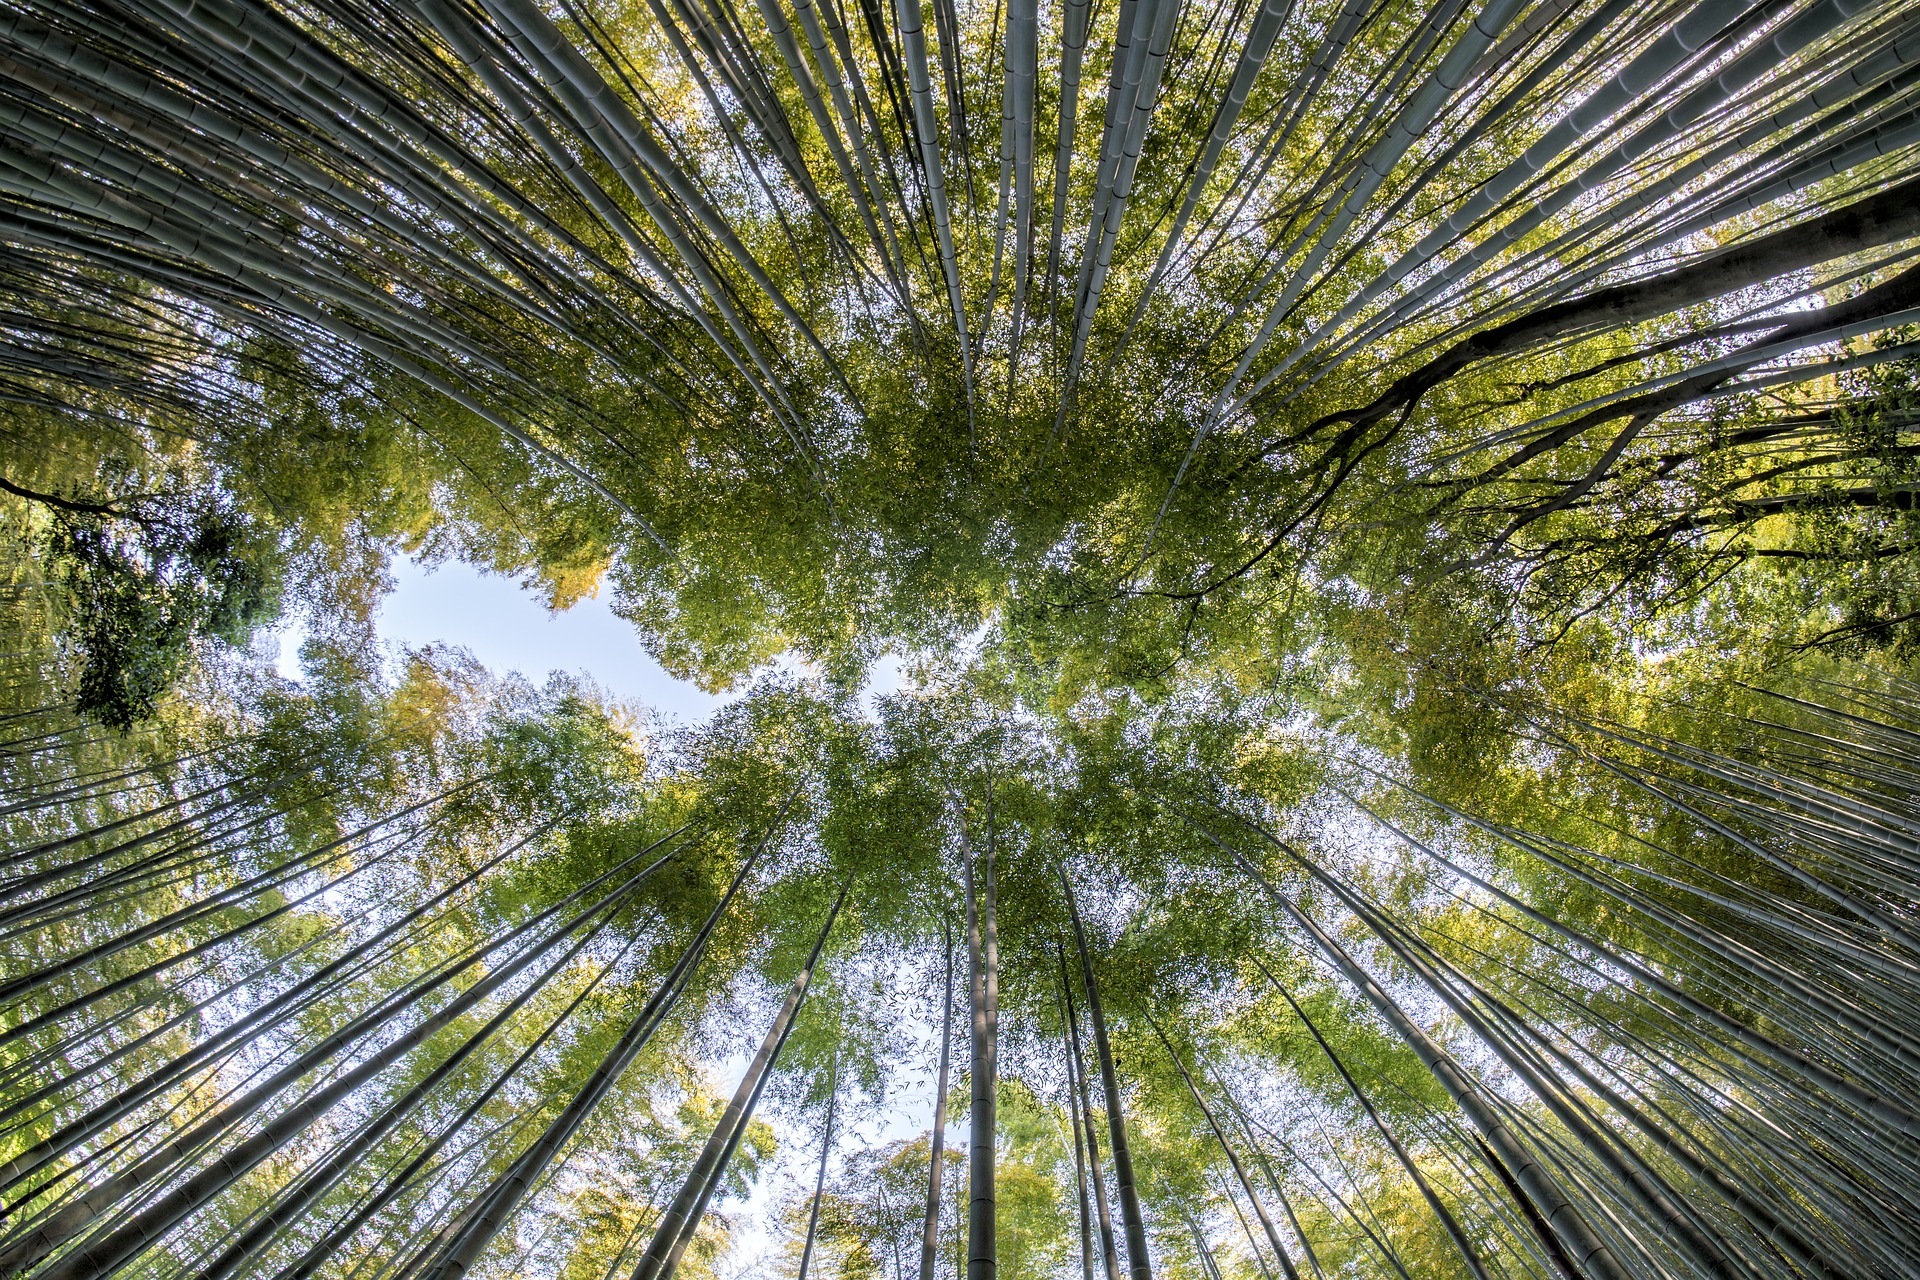 View of bamboo forest looking at sky